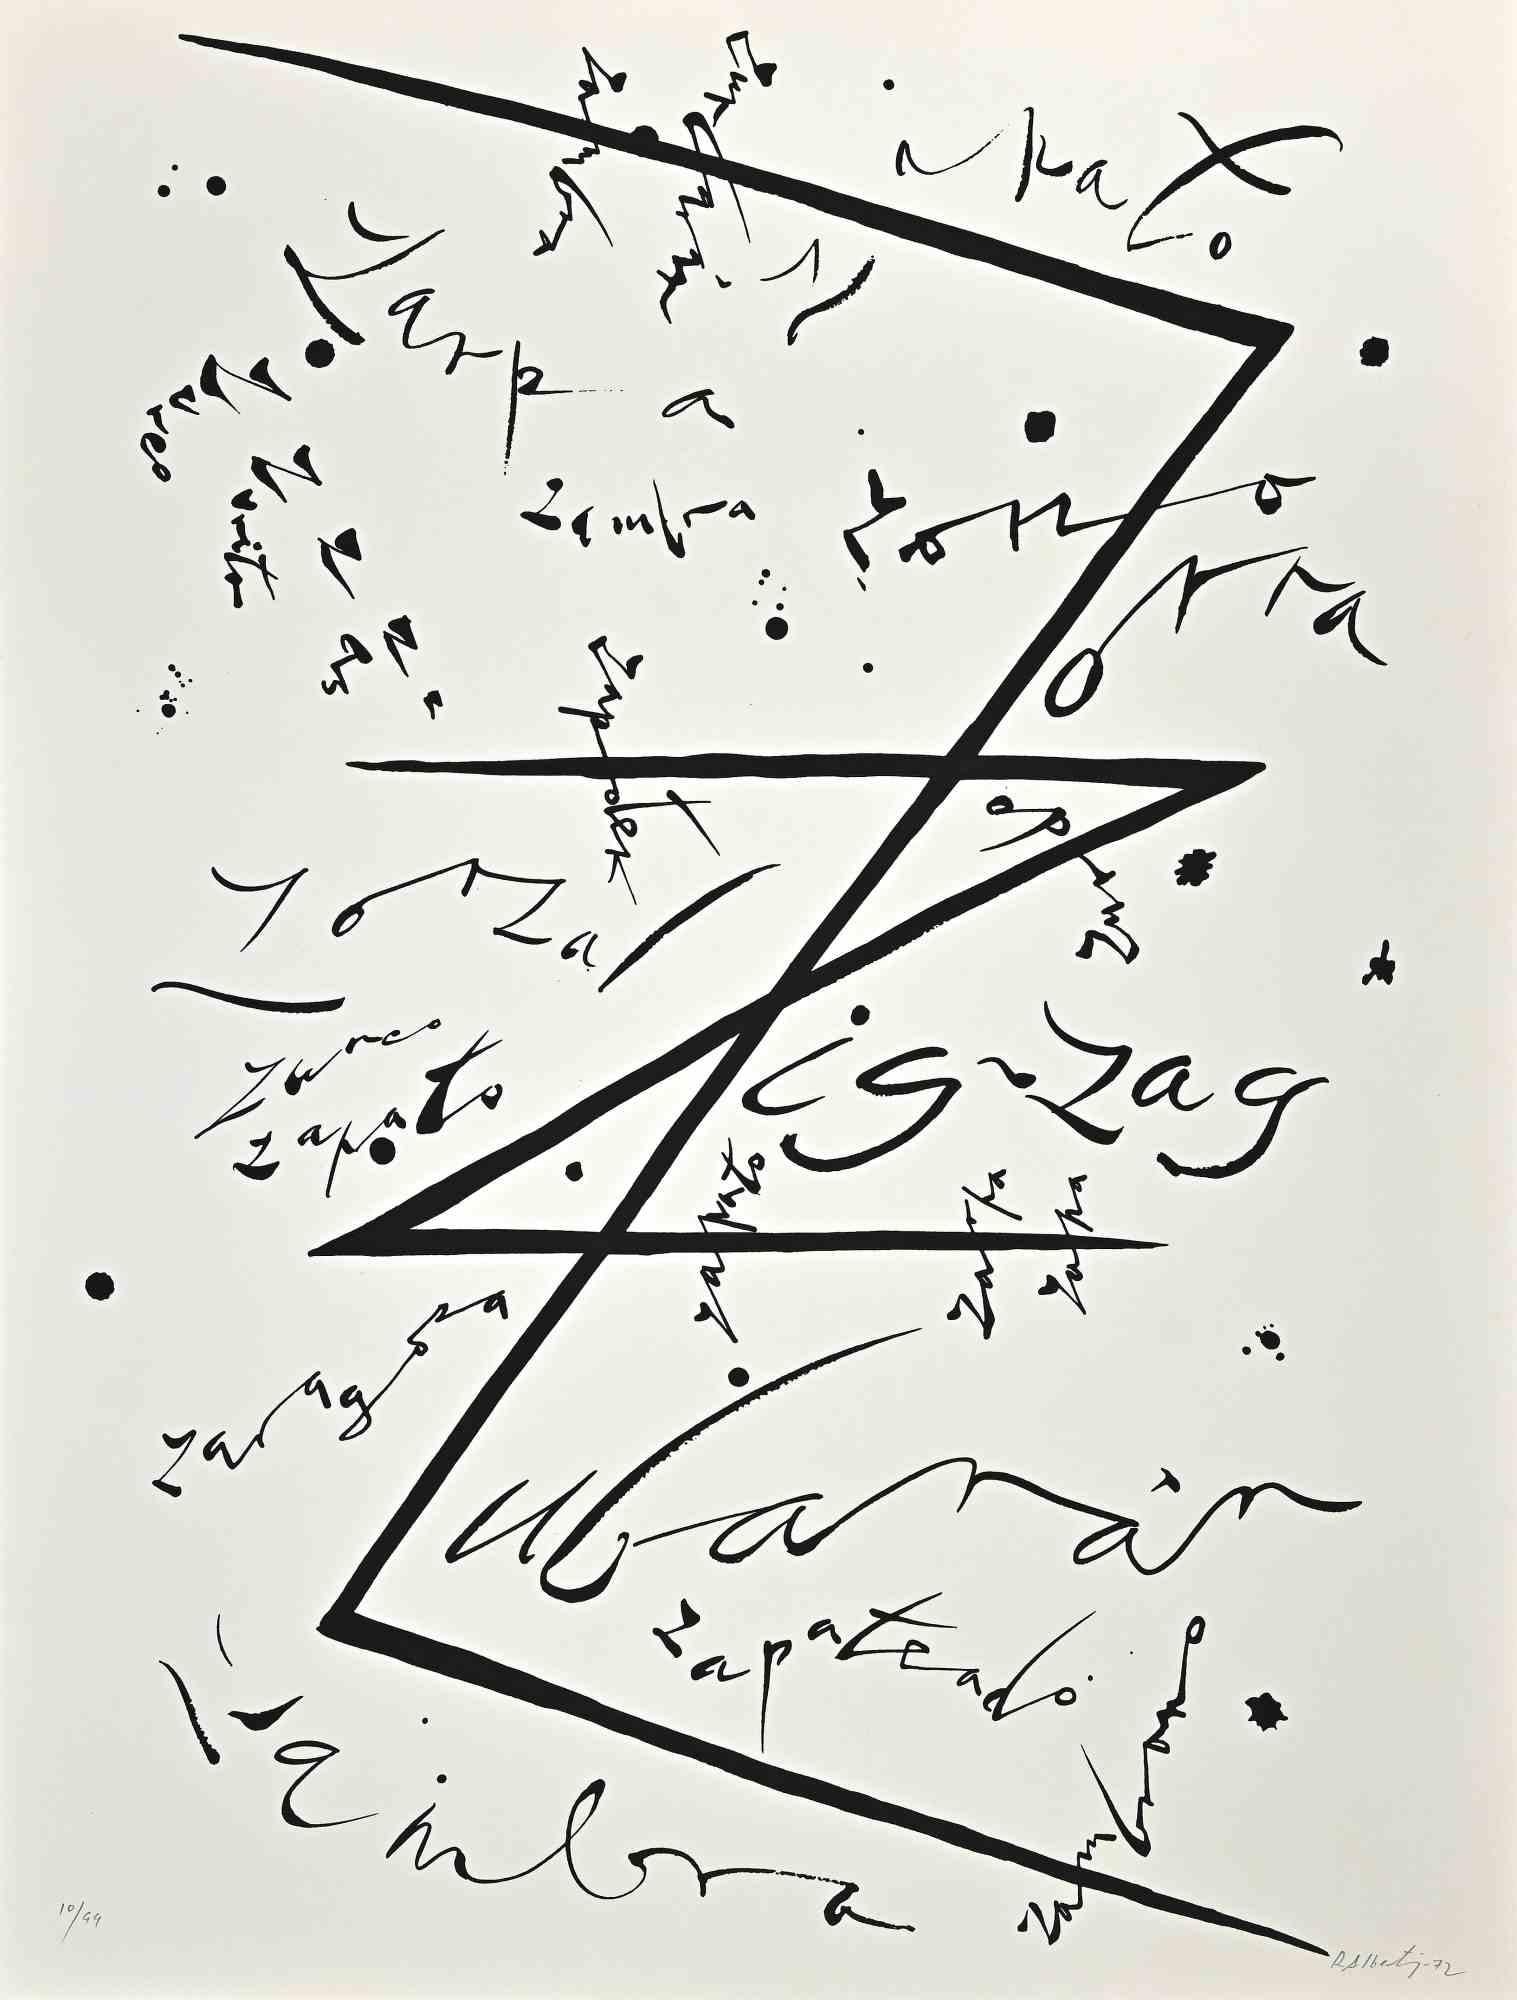 Letter Z   from Alphabet series is an original lithograph realized by Rafael Alberti in 1972.

Hand-signed and dated on the lower margin.

Numbered on the lower margin. Edition 10/99

Good conditions

The artwork represents alphabet letter Z, with a